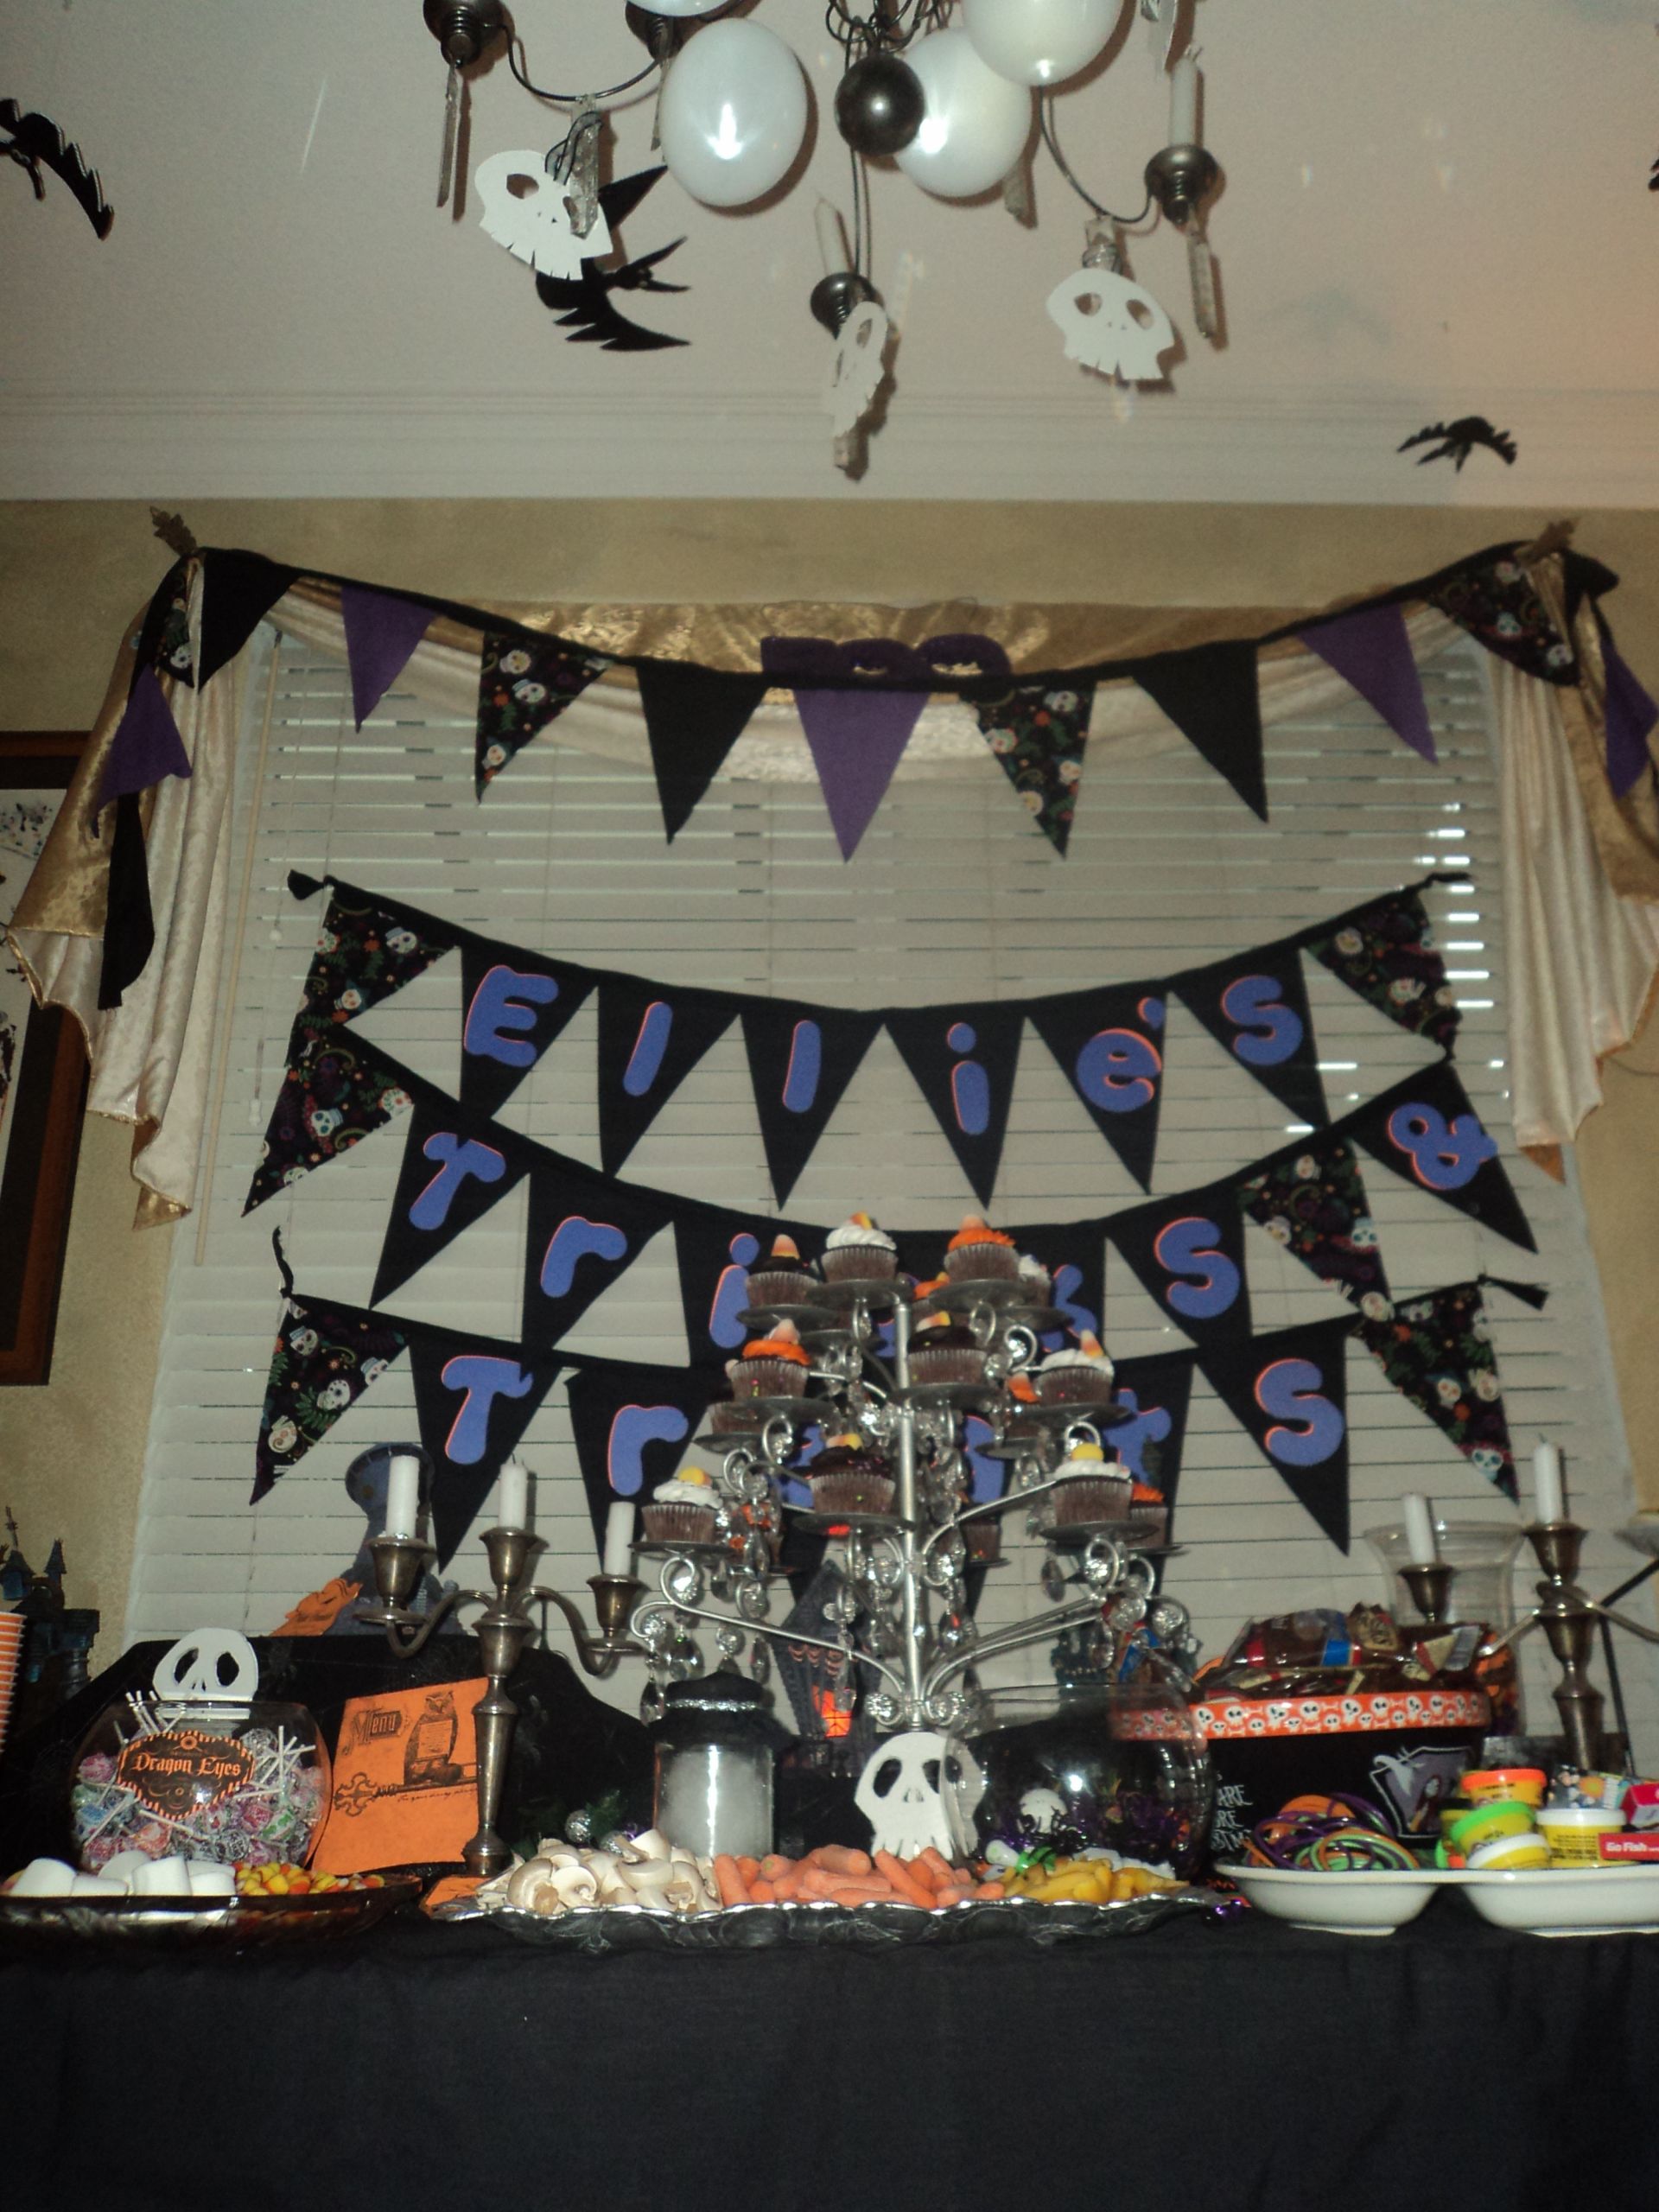 The Nightmare Before Christmas Birthday Party Ideas
 Nightmare Before Christmas Birthday Party – Revisited